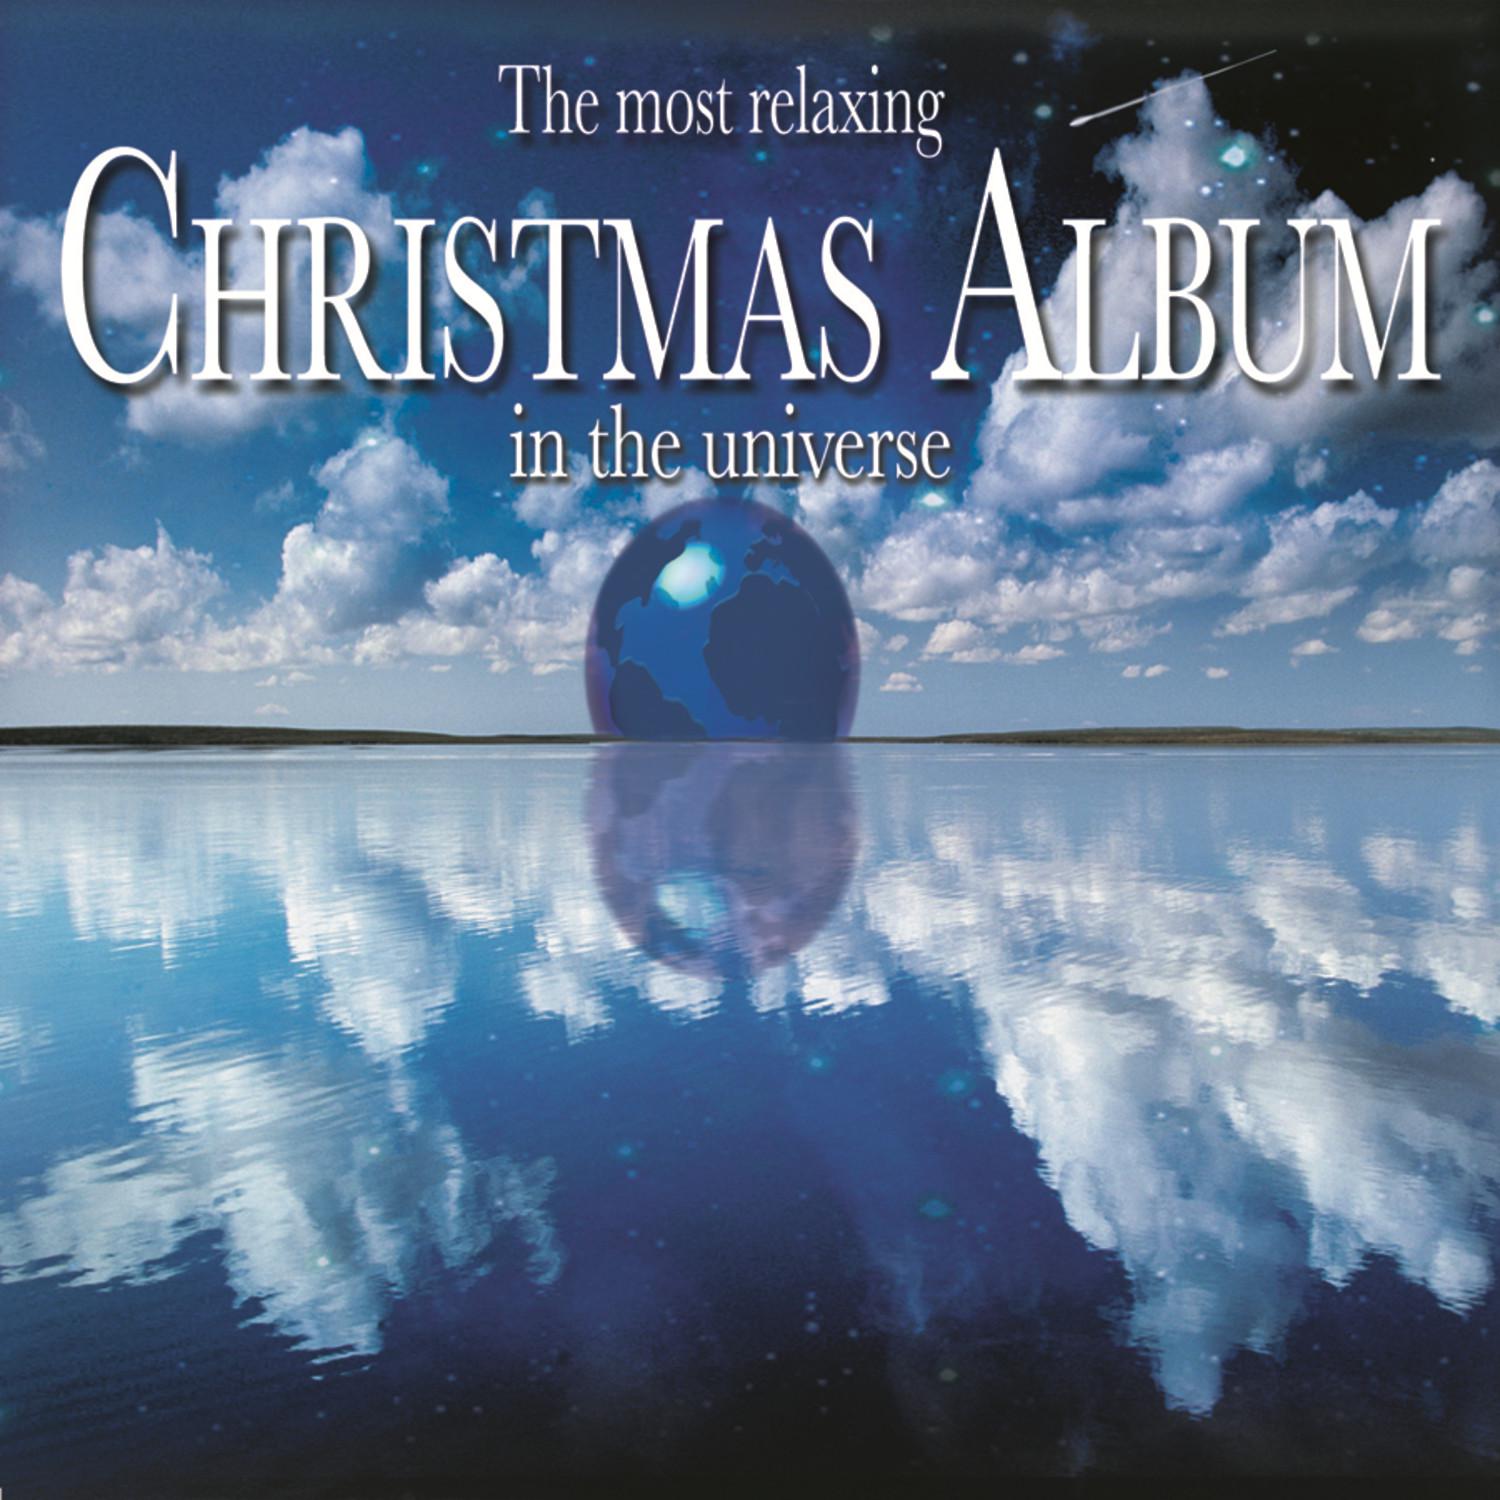 The Most Relaxing Christmas Album in the Universe